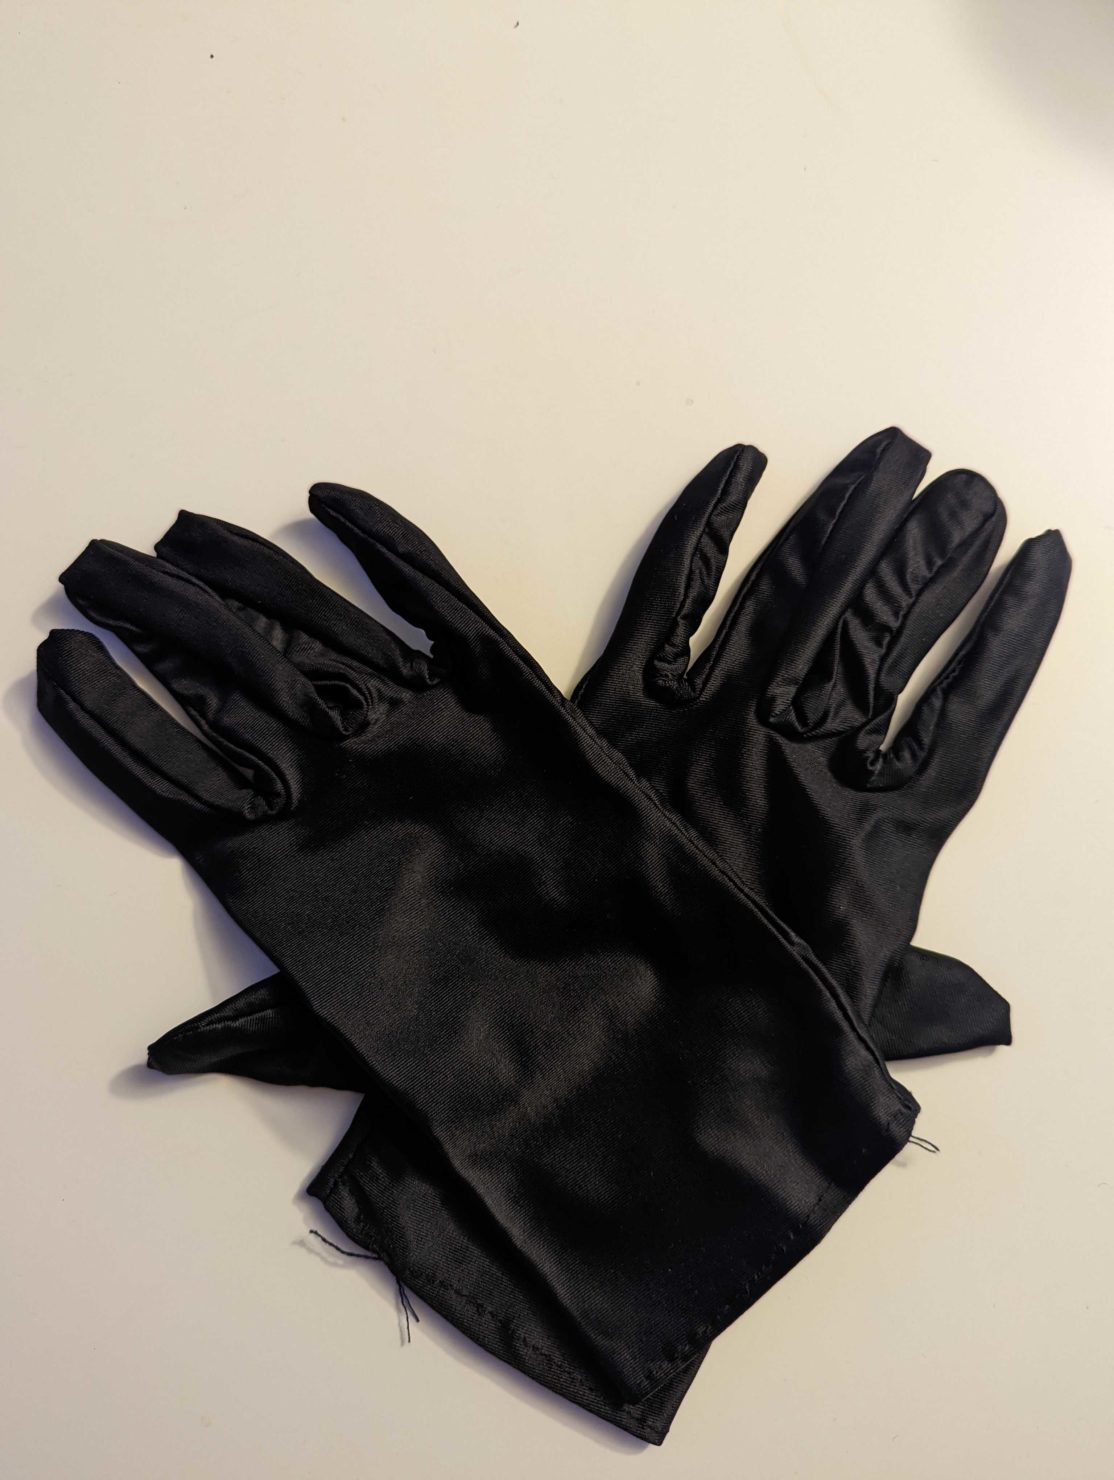 Unboxing gloves that came with the AYANEO NEXT